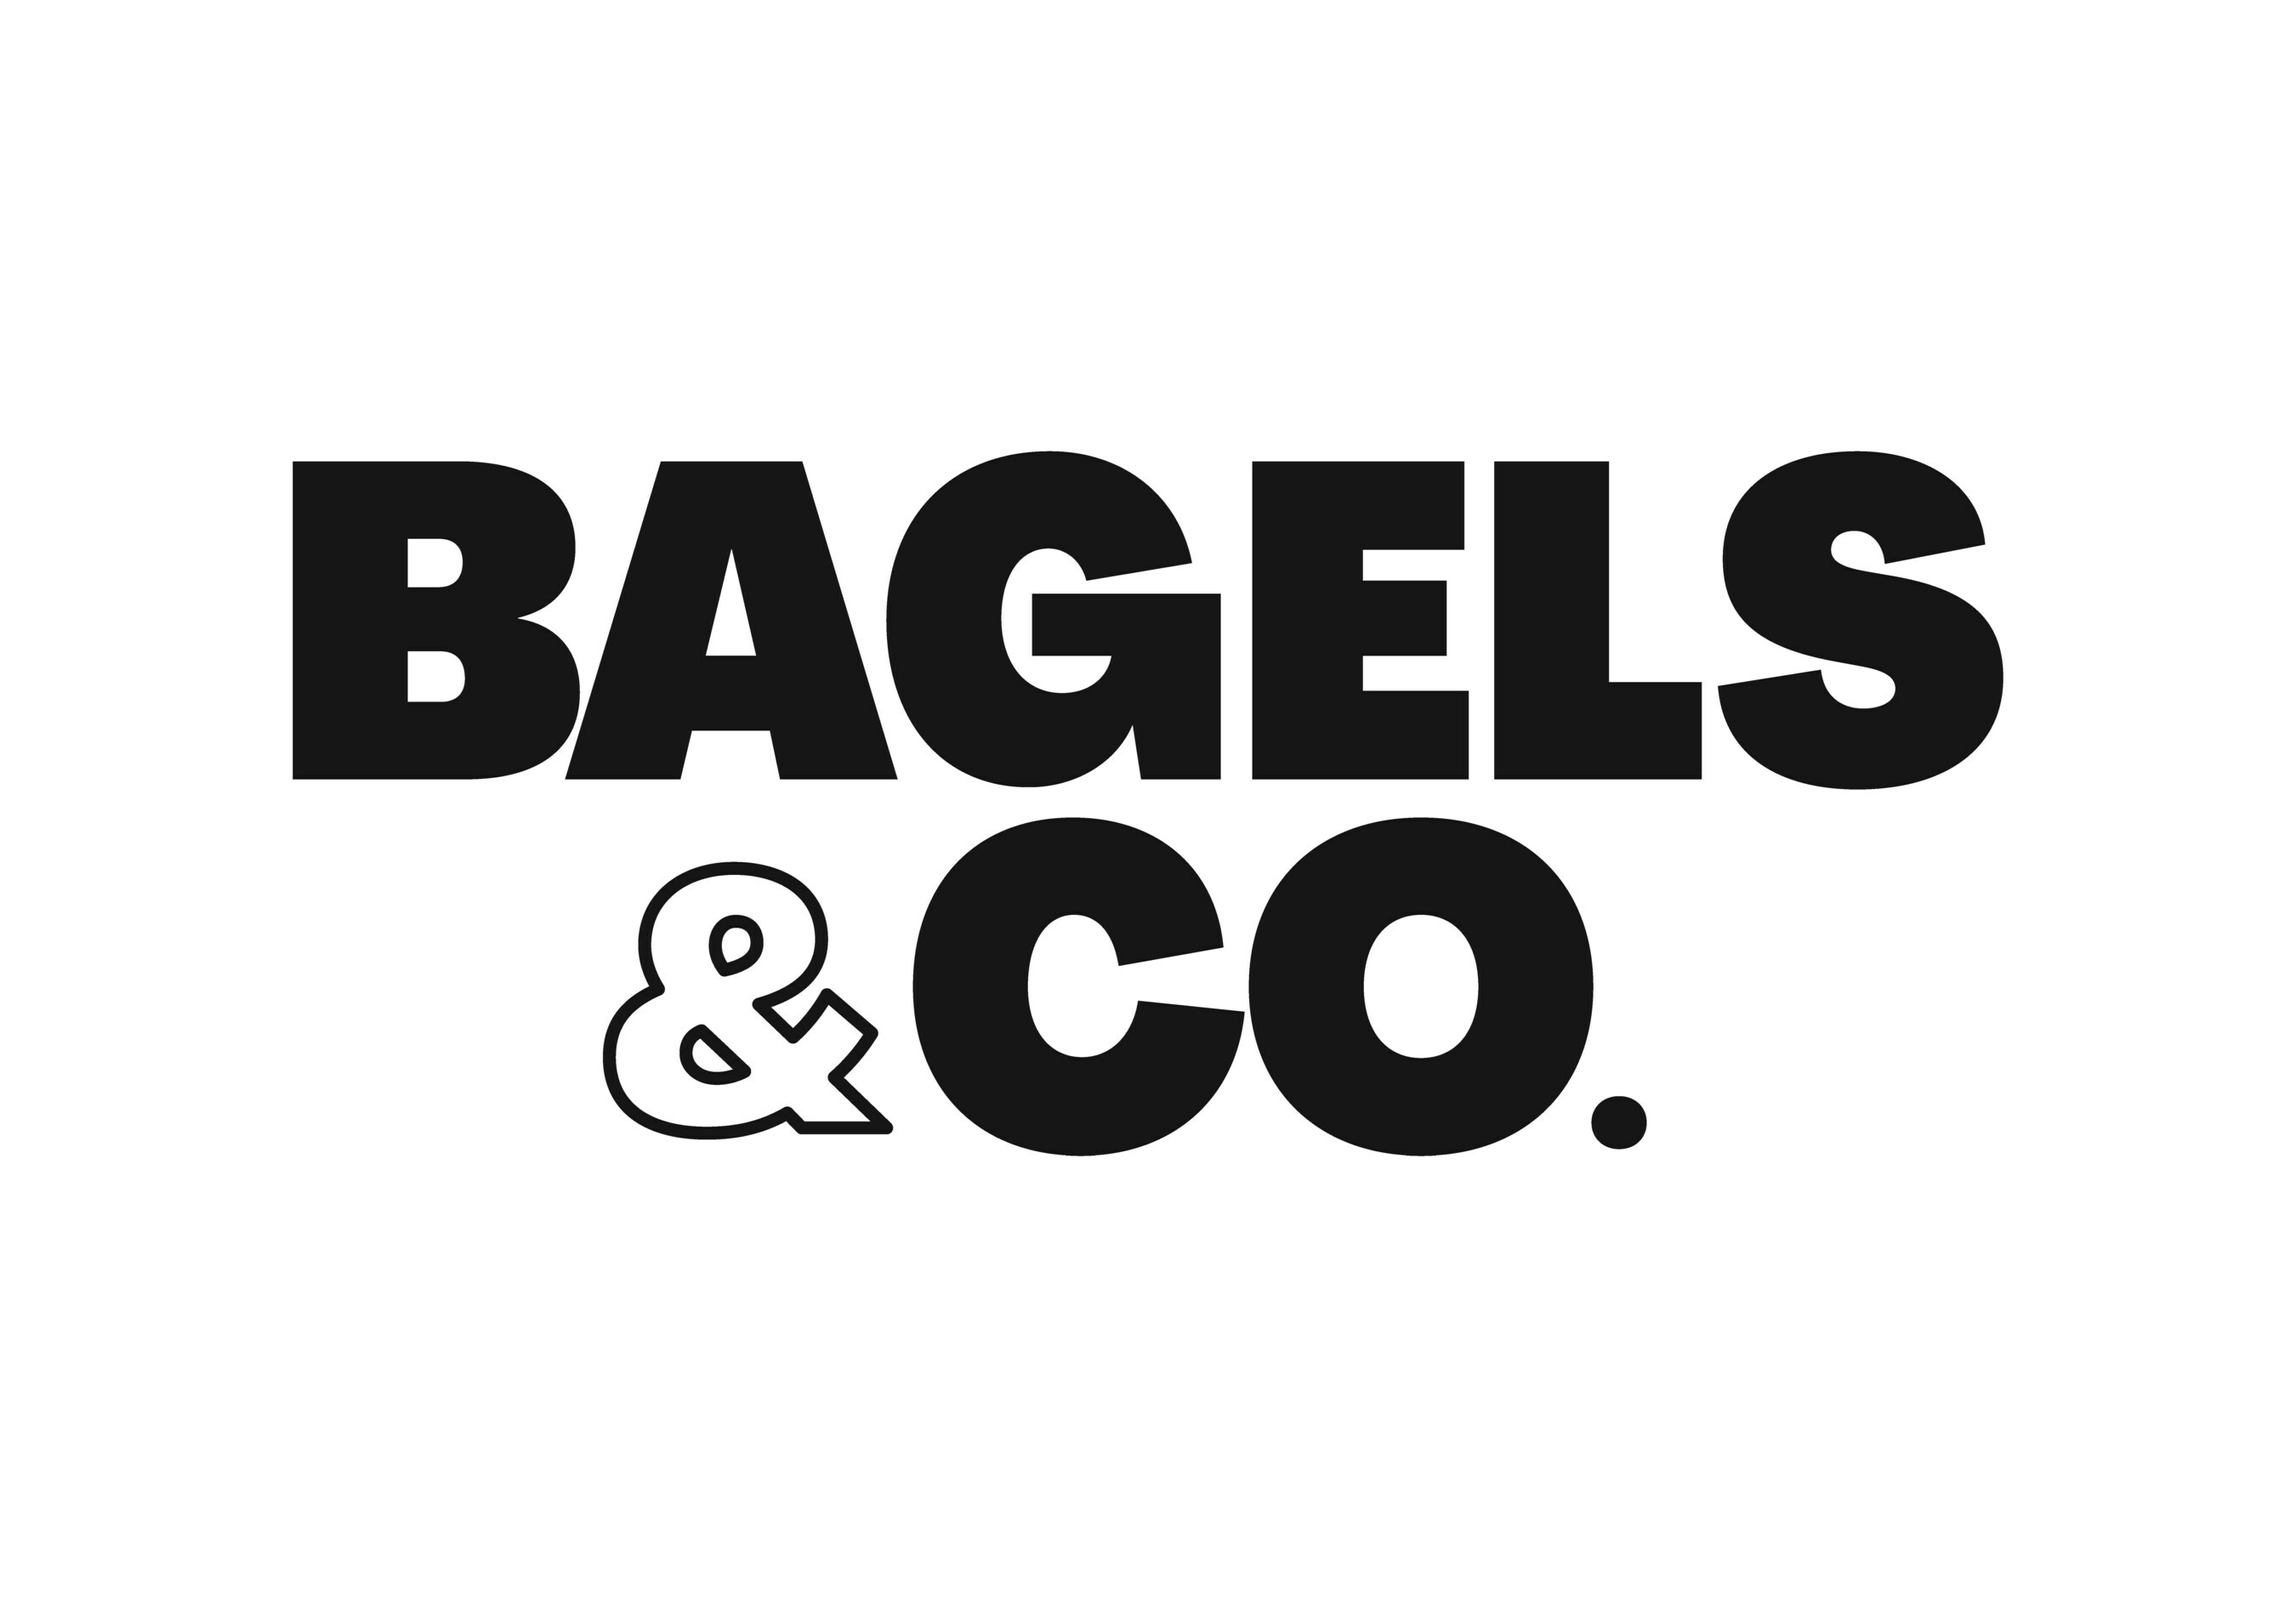 Philadelphia-based Bagels & Co., known for its innovative flavors of cream cheese and Brooklyn style bagels, has announced expansion plans to open 20 locations throughout Pennsylvania and Florida.